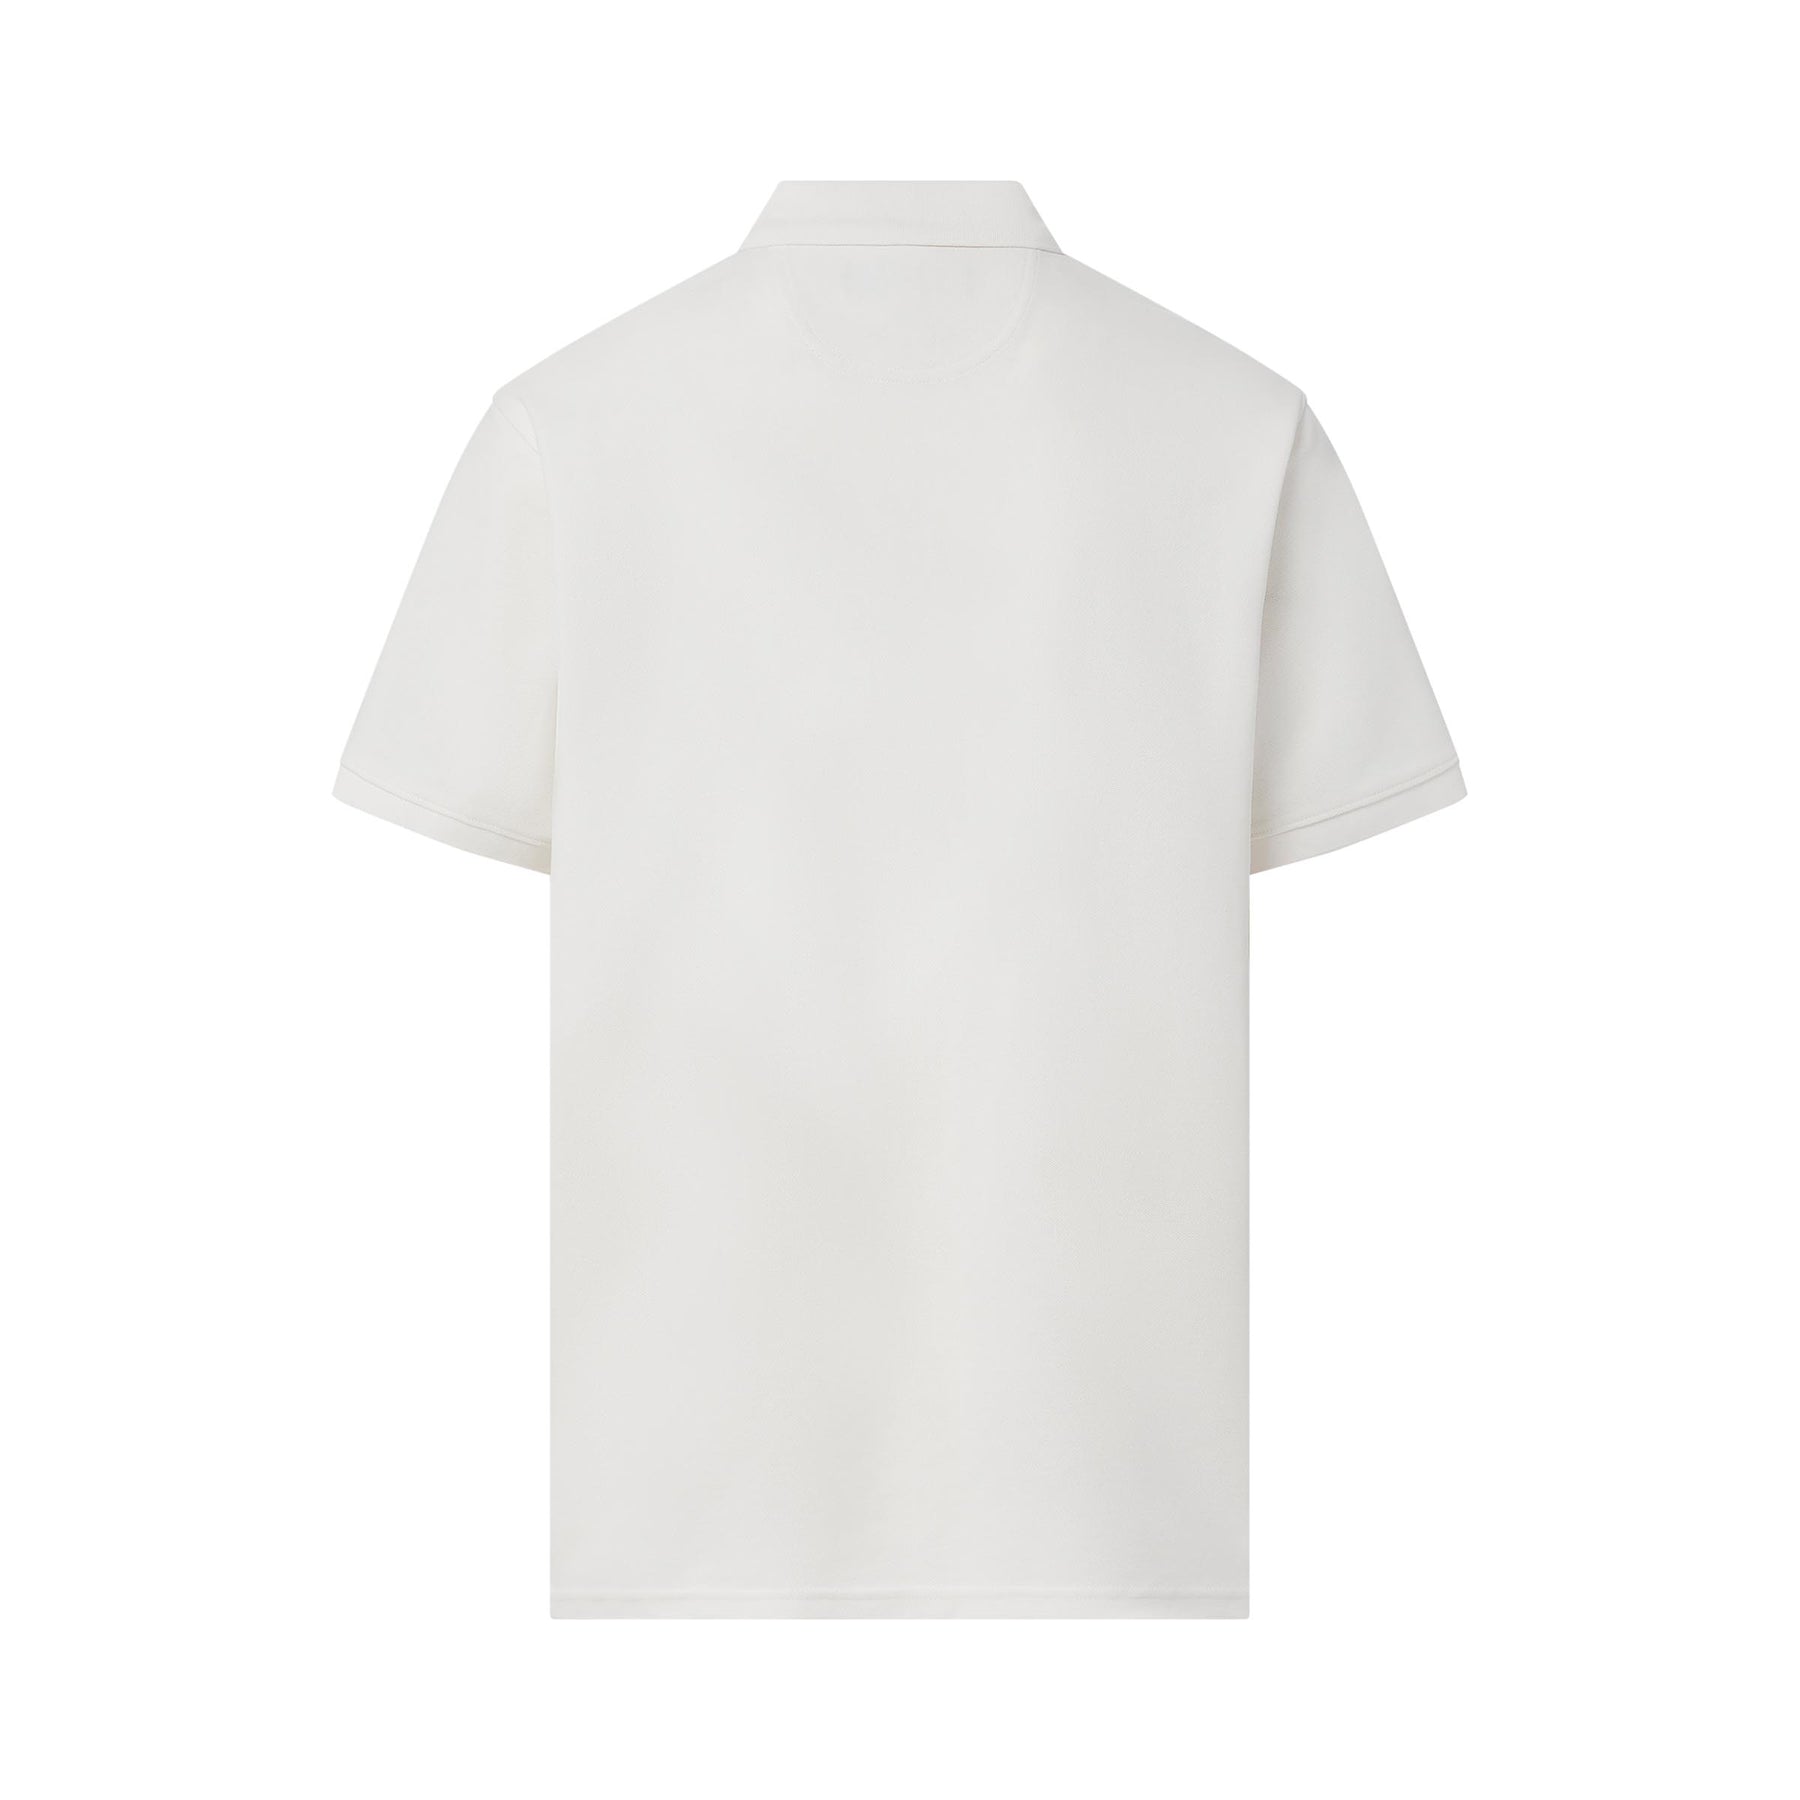 White Pique Knit Short Sleeve Polo with Magnetic Closures